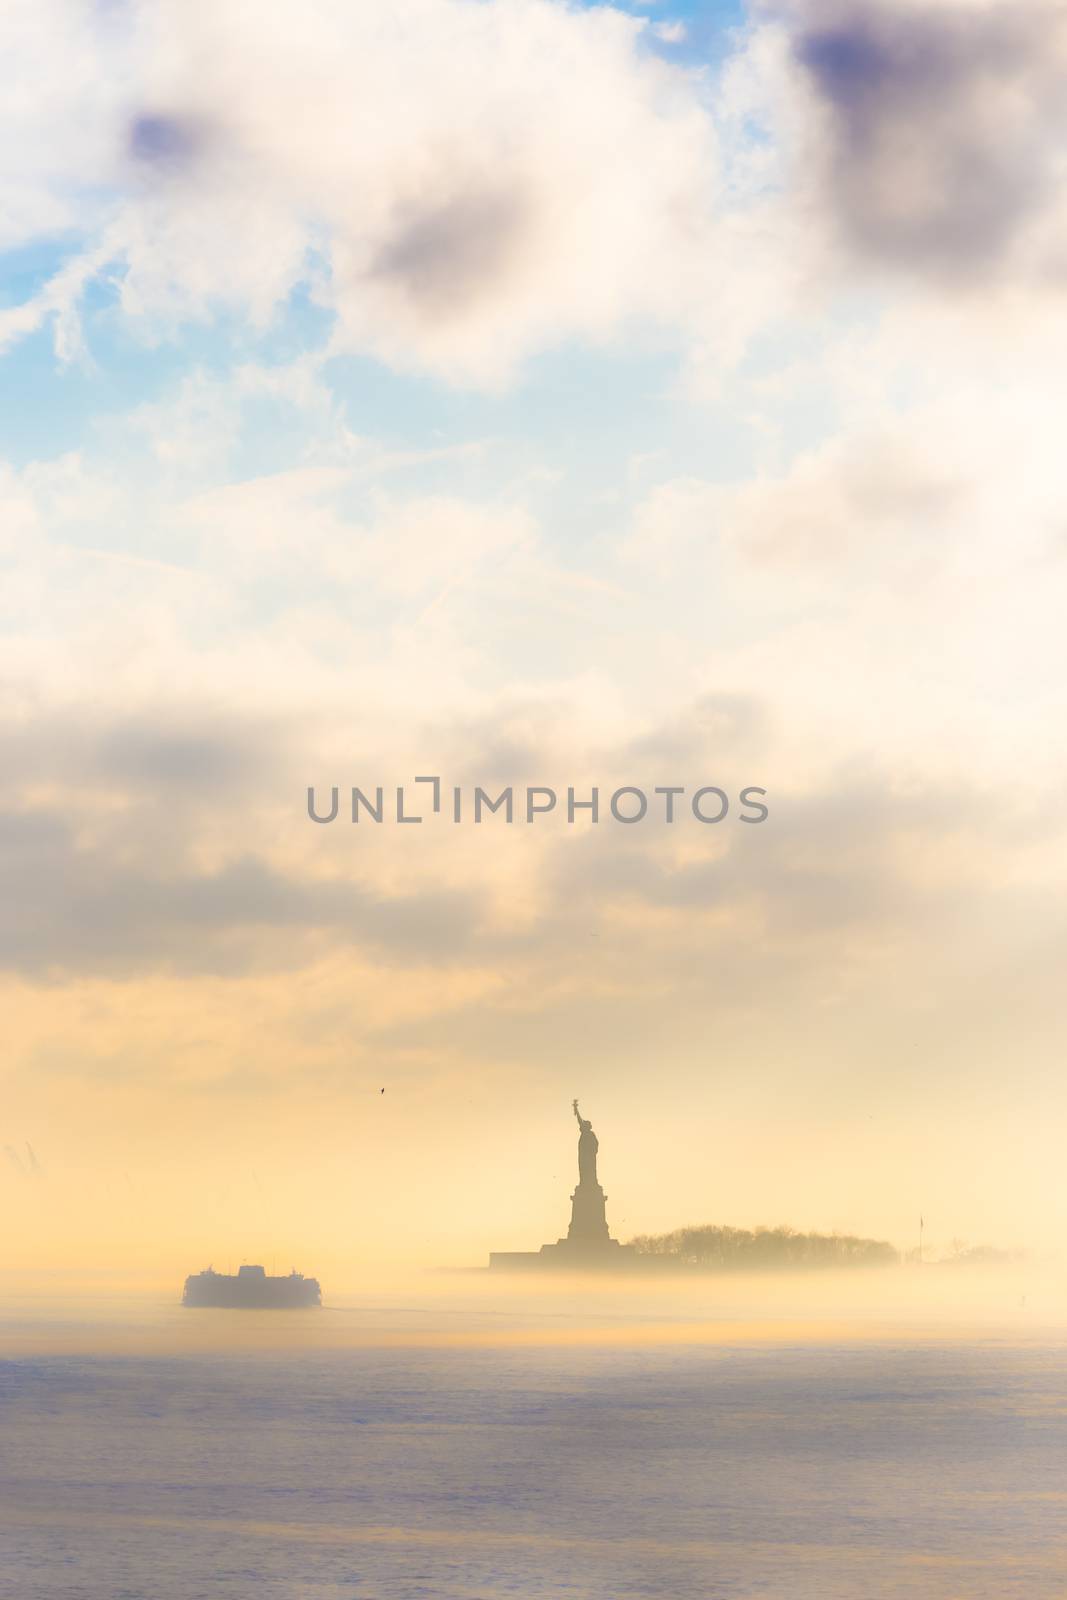 Staten Island Ferry cruises past the Statue of Liberty on a misty sunset. Manhattan, New York City, United States of America. Vertical composition. Copy space.